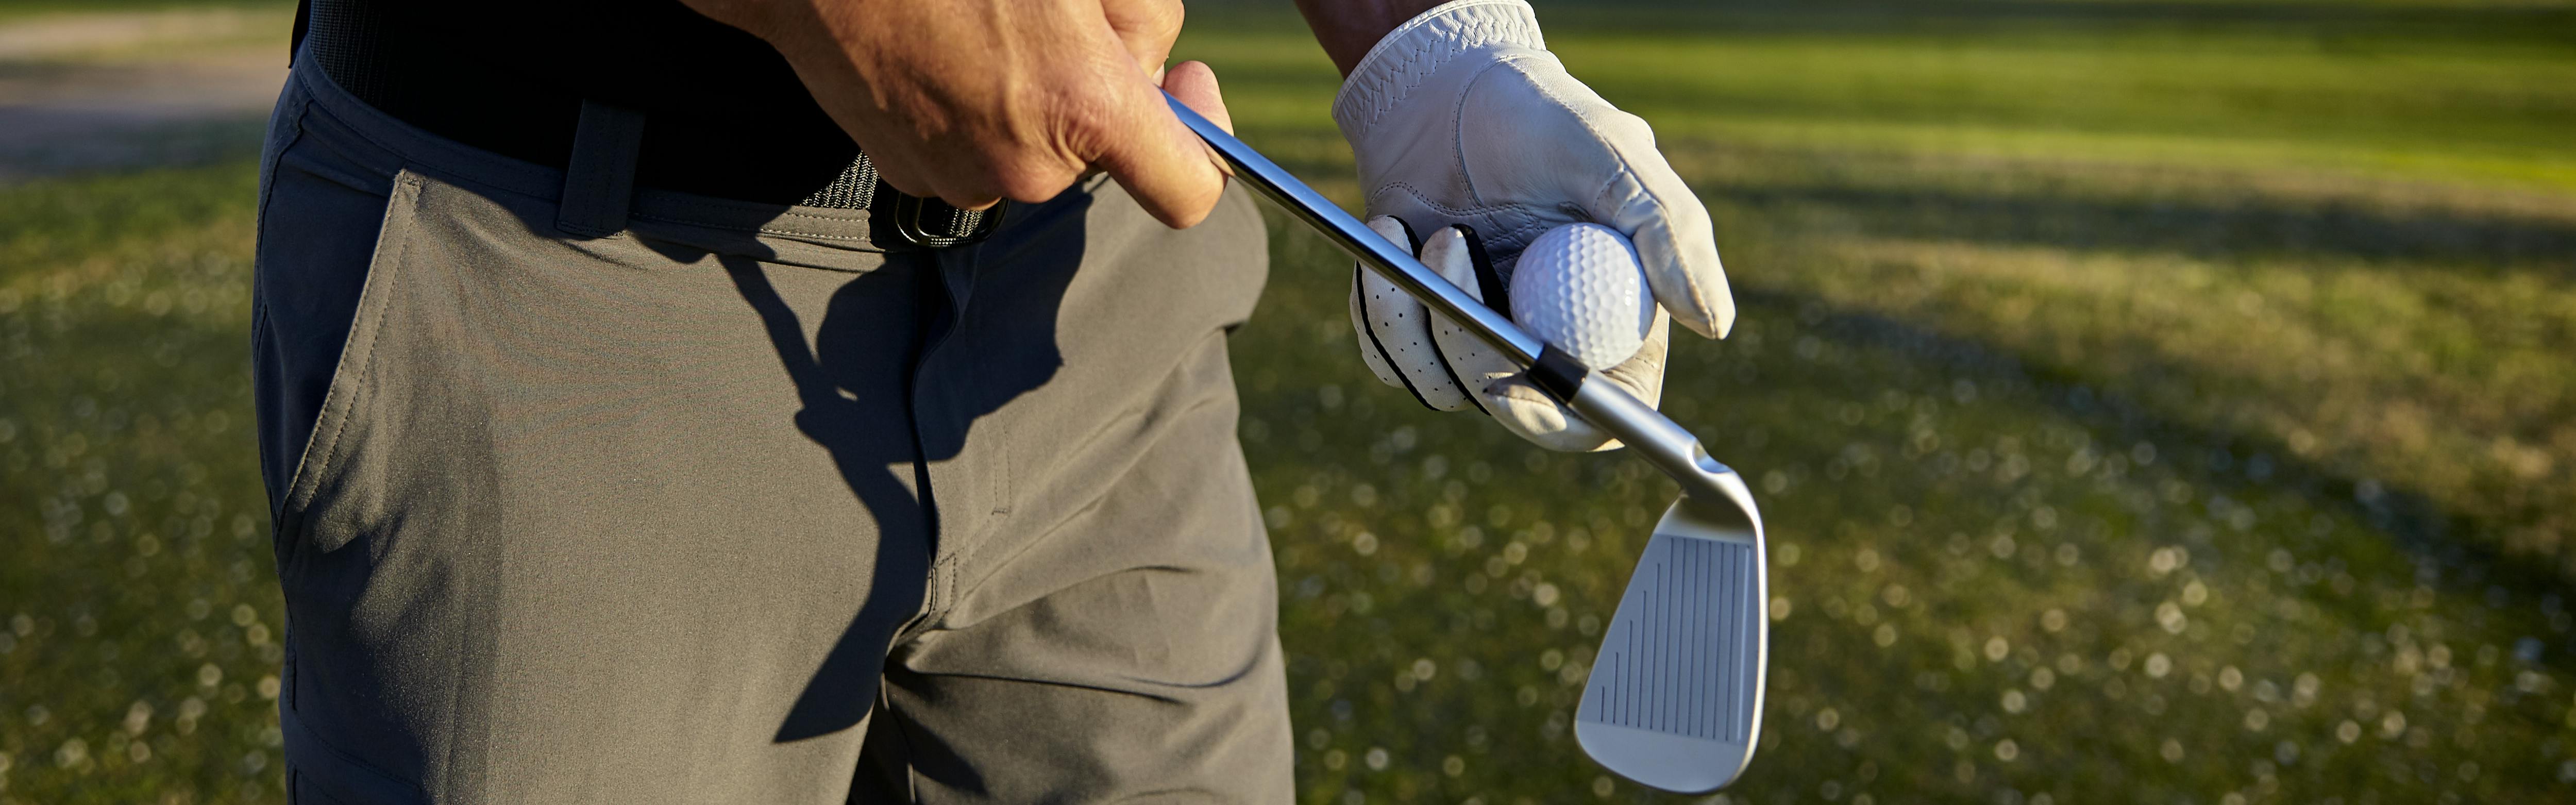 An Expert Guide on How to Hit Long Irons | Curated.com